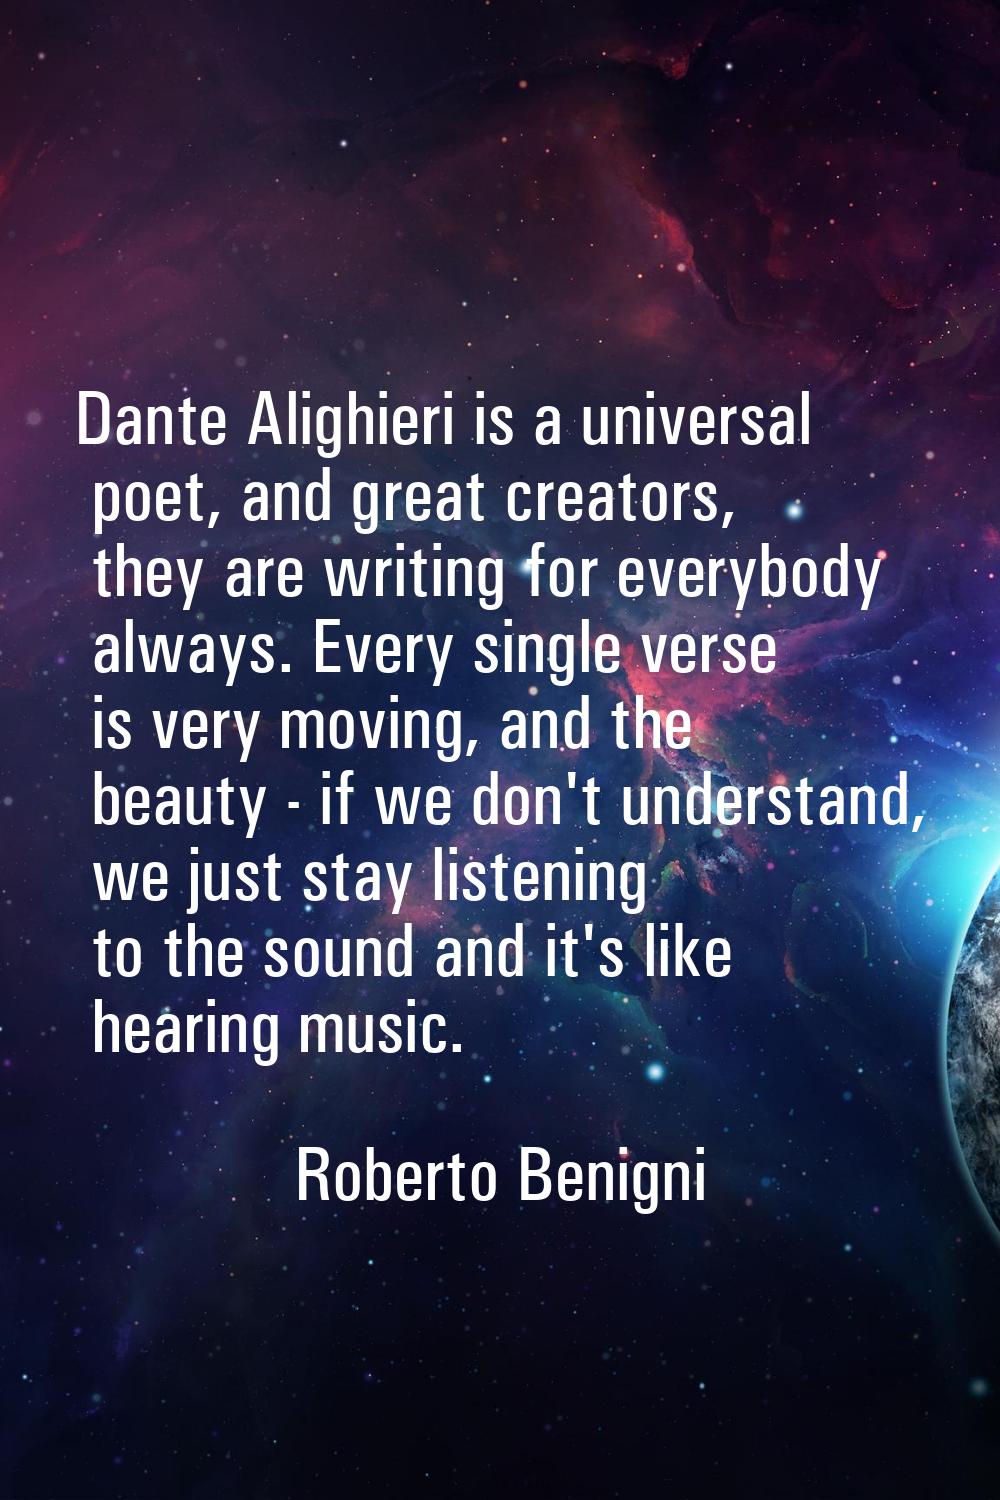 Dante Alighieri is a universal poet, and great creators, they are writing for everybody always. Eve